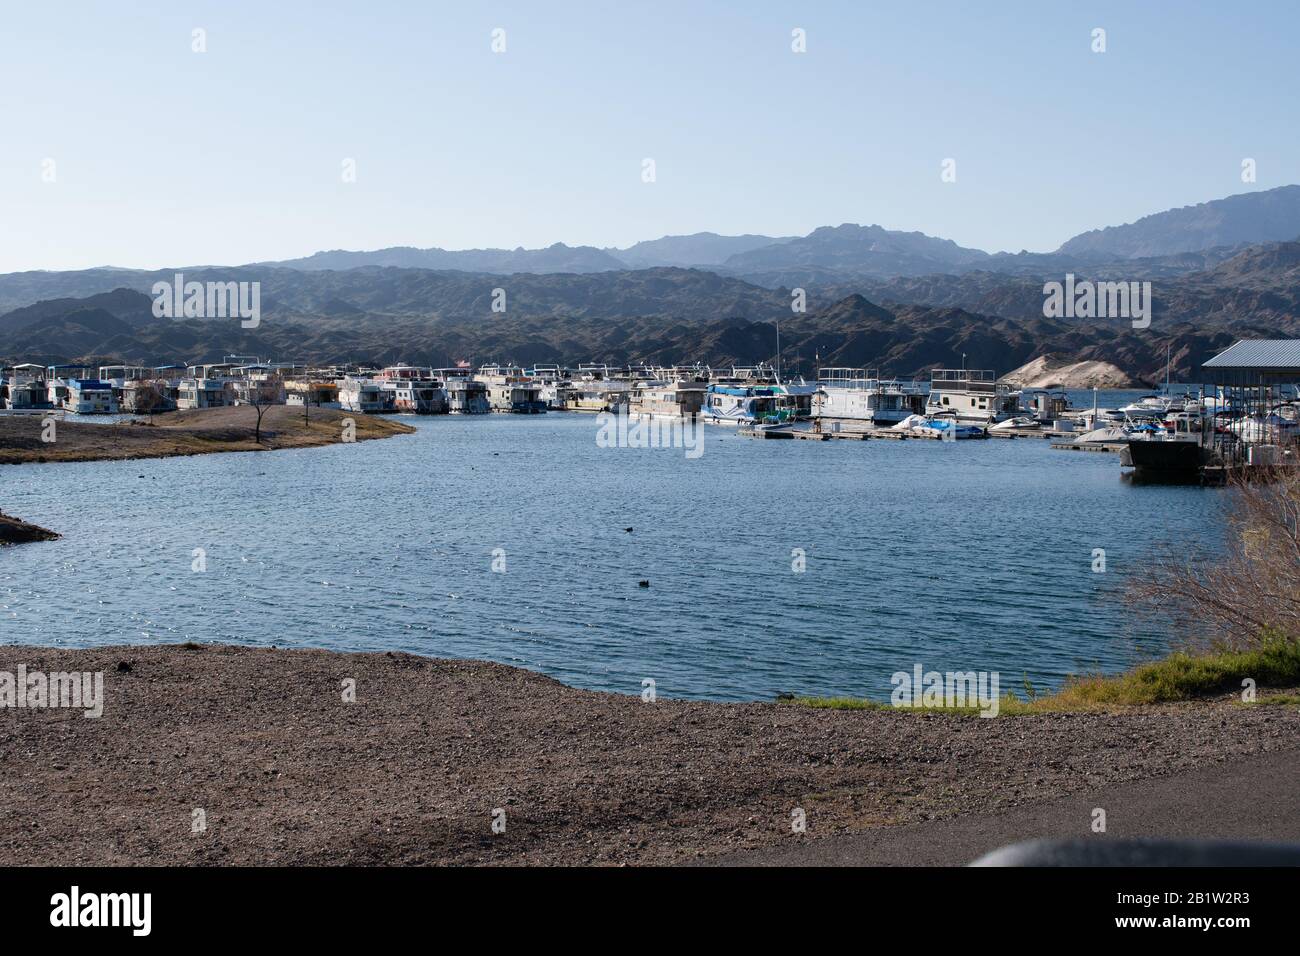 House boats docked at Lake Mohave Stock Photo